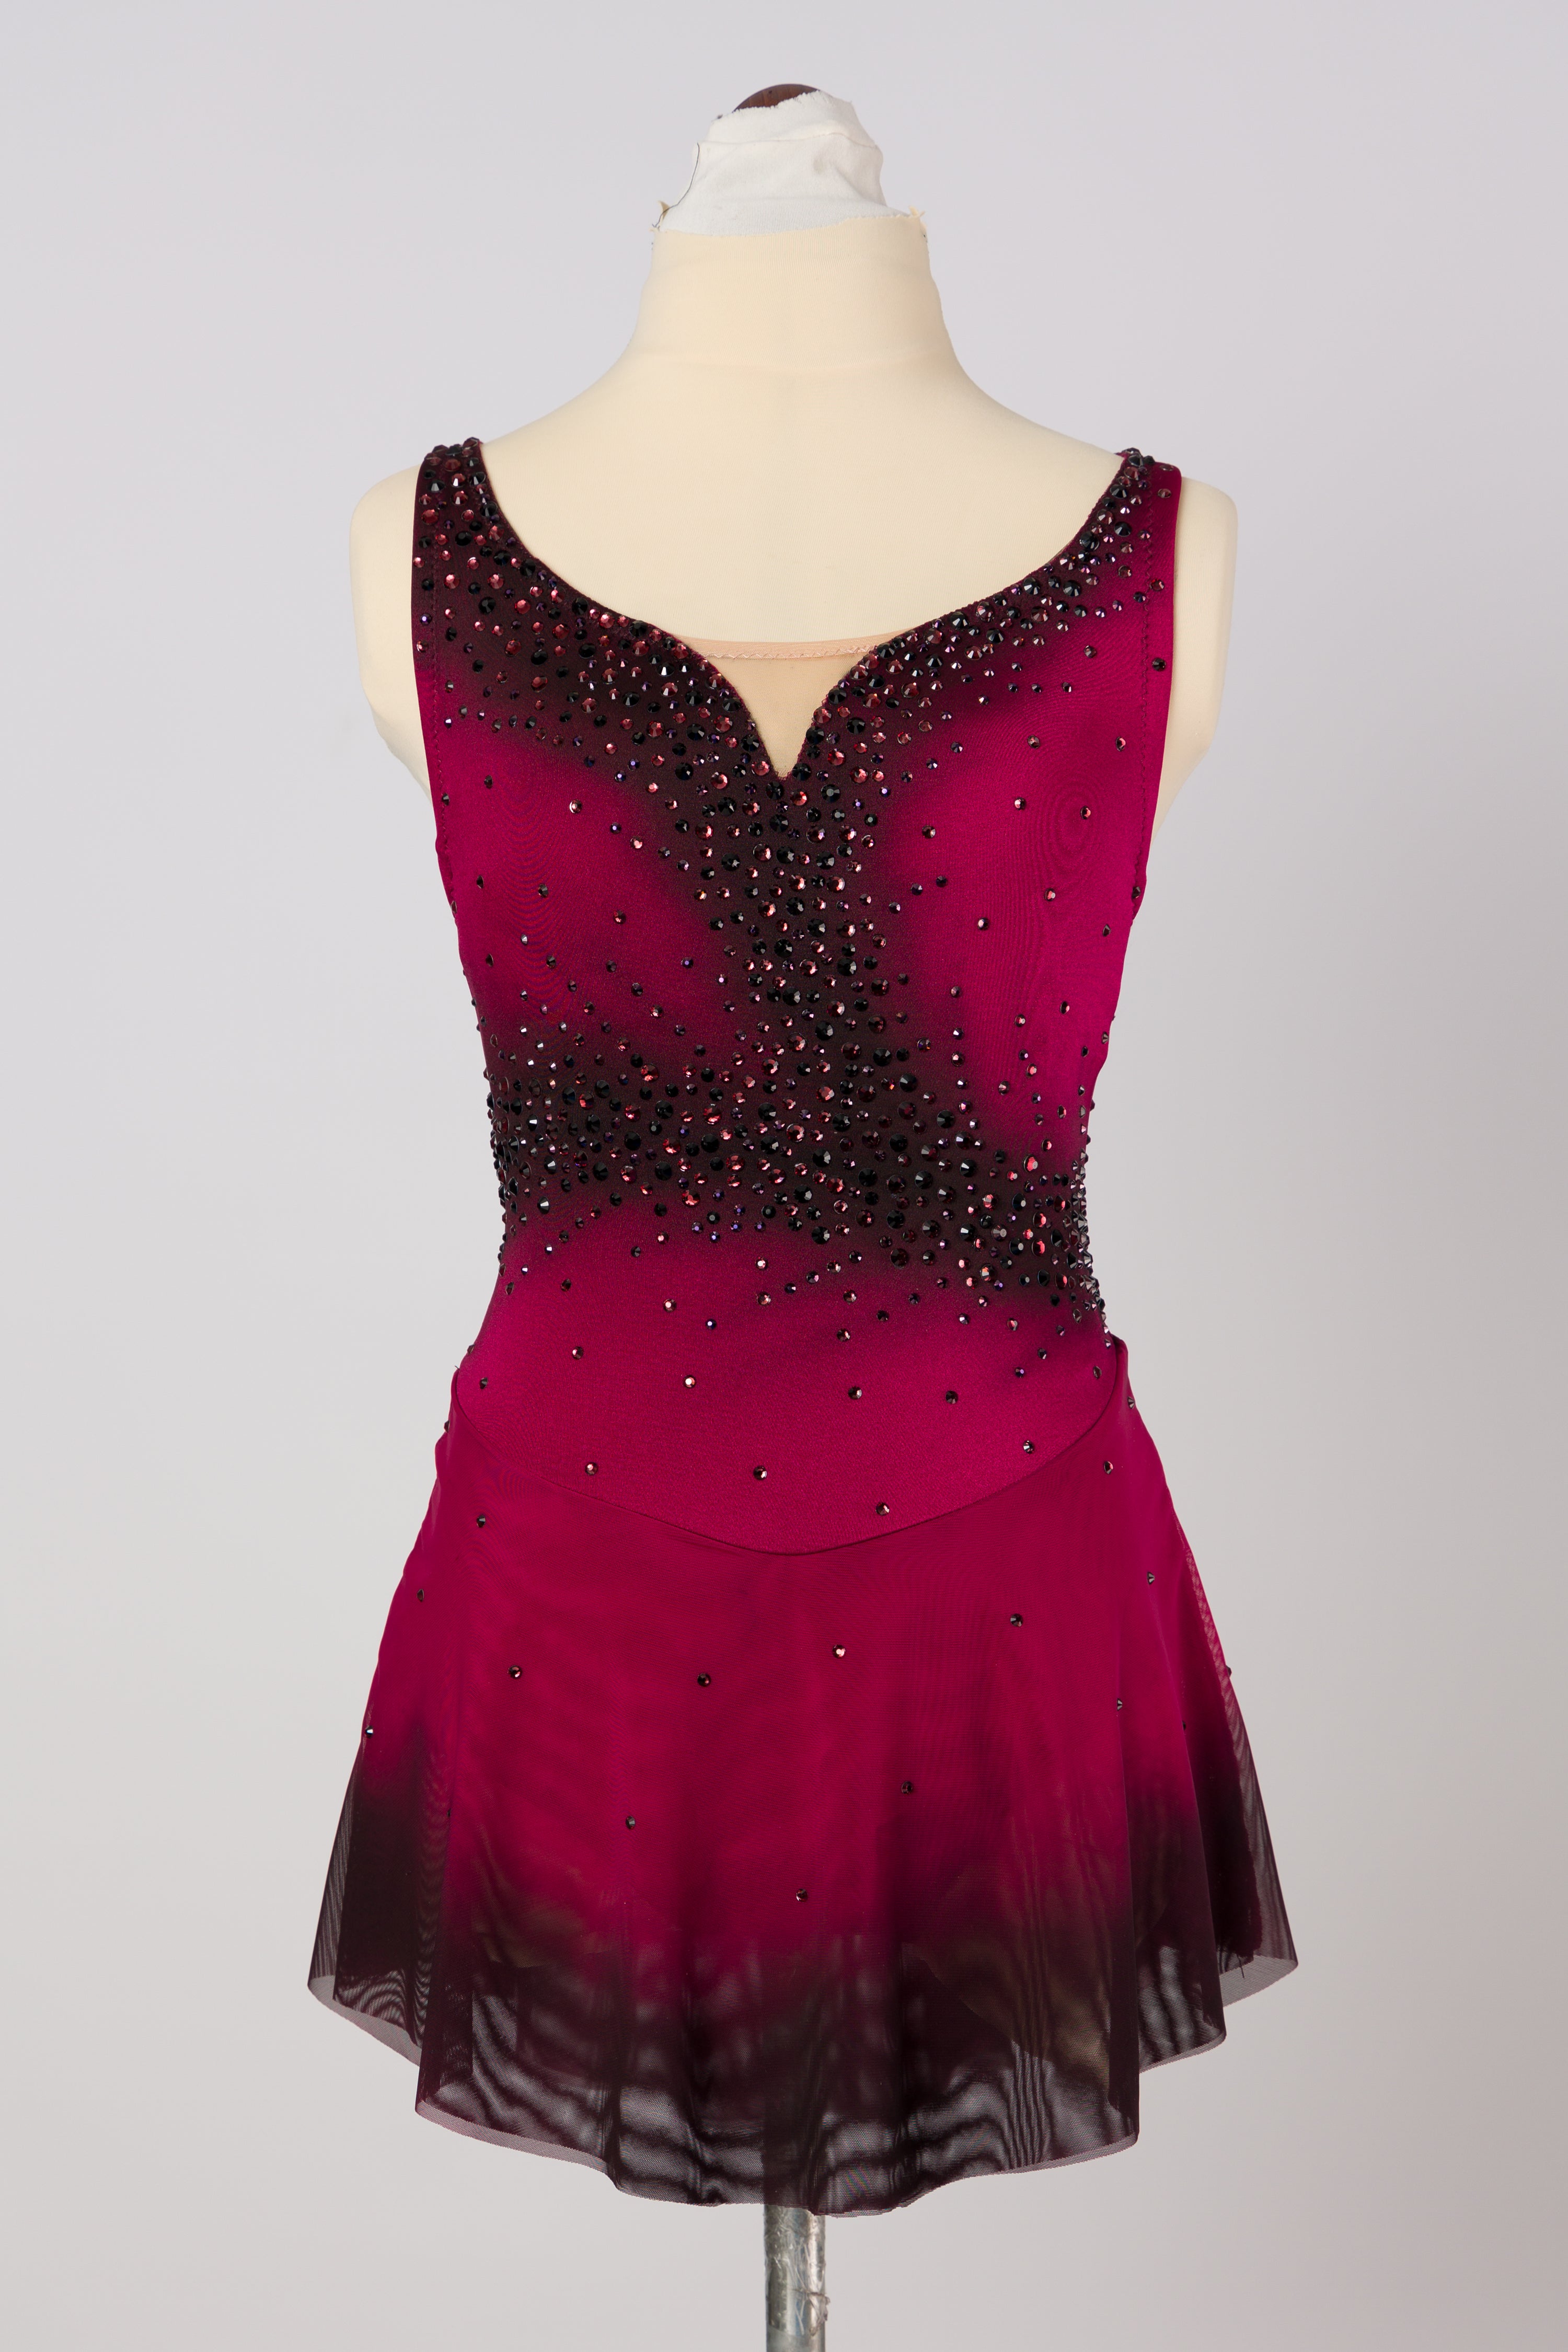 Wine-colored figure skating dress with black airbrushing, sleeveless, double-layer mesh skirt